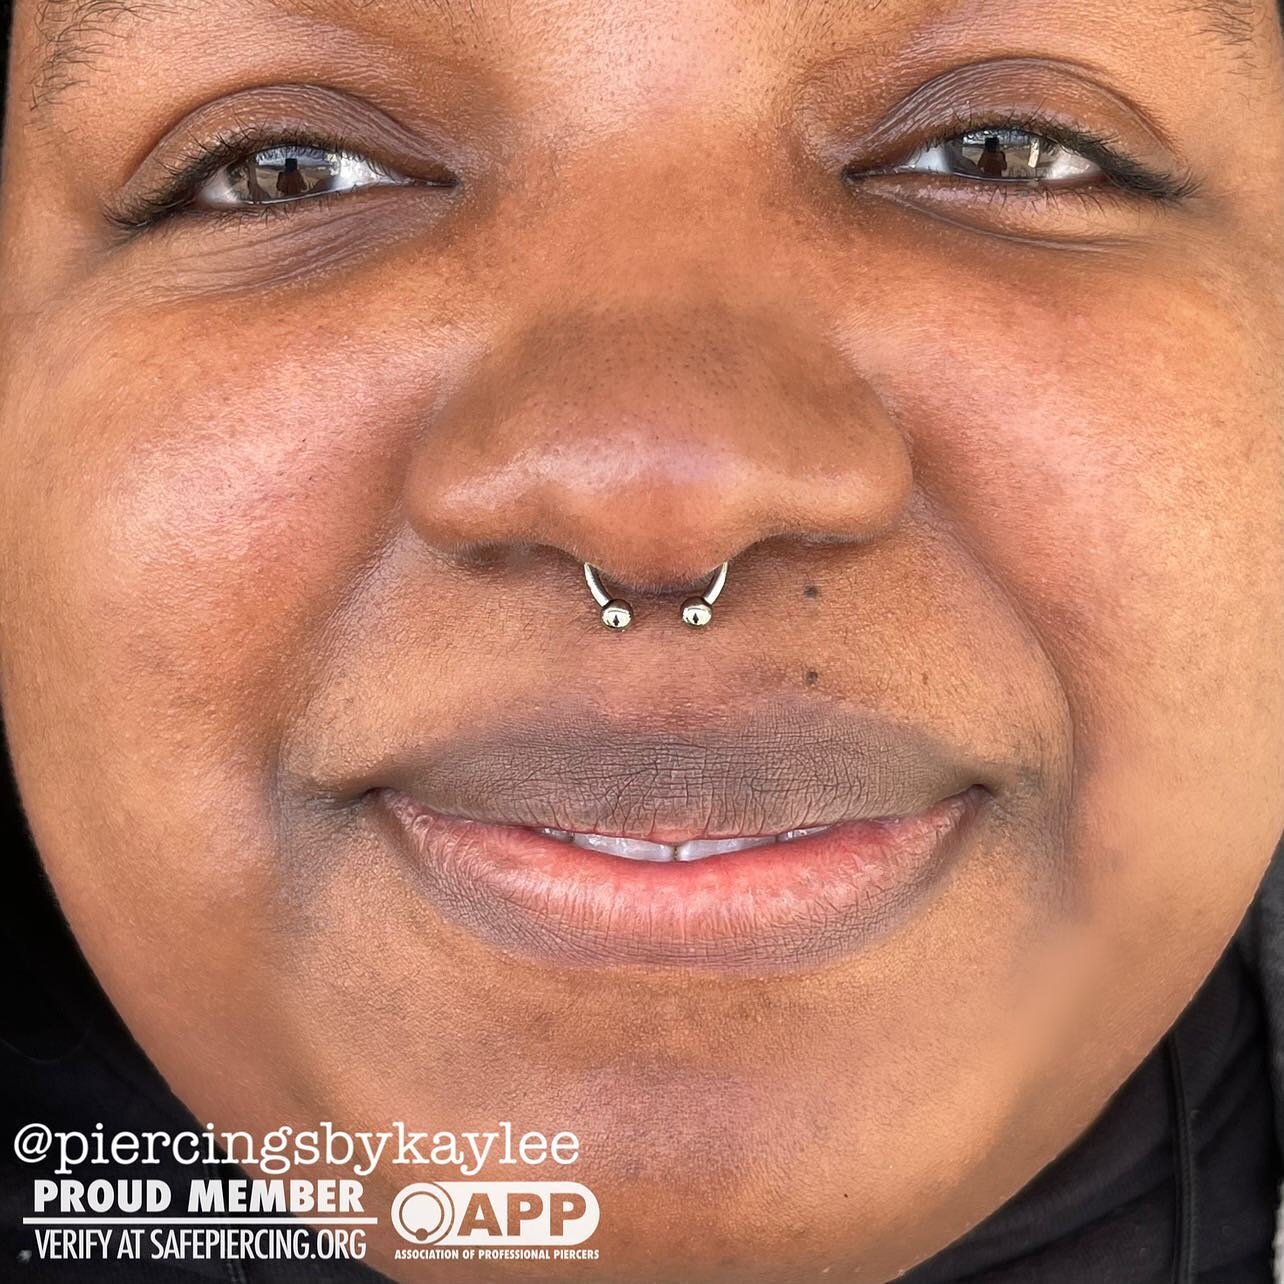 I had the pleasure of piercing the septum the other day, and we were both so happy with the results! Thanks for the trust ✨
.
.
.
#septum #septumpiercing #pierced #piercing #safepiercing #appmember #piercerbabes #kcmo #kansascity #2023